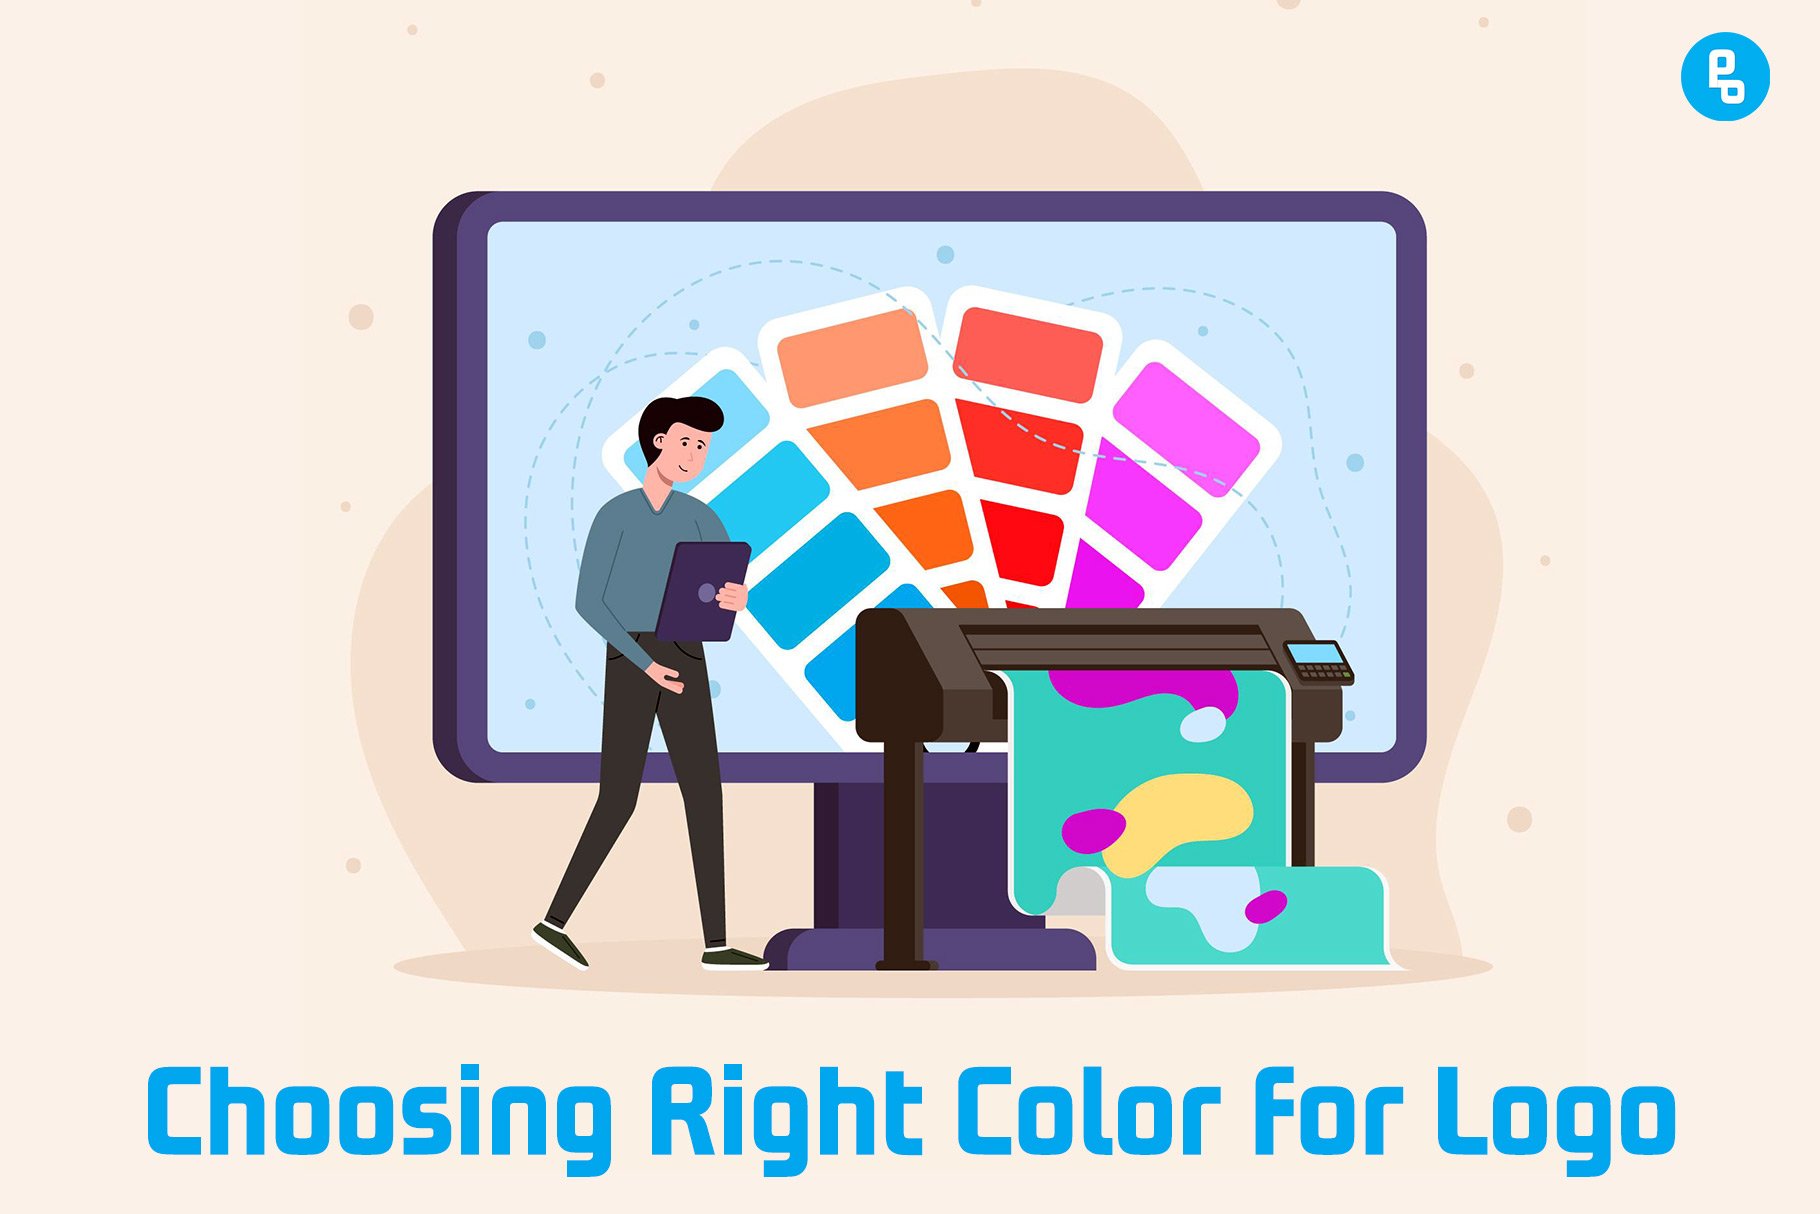 How do you choose the right color for your logo? In this post, We'll walk you through the process of choosing a color scheme and show you how to pick the ideal colors for your brand.